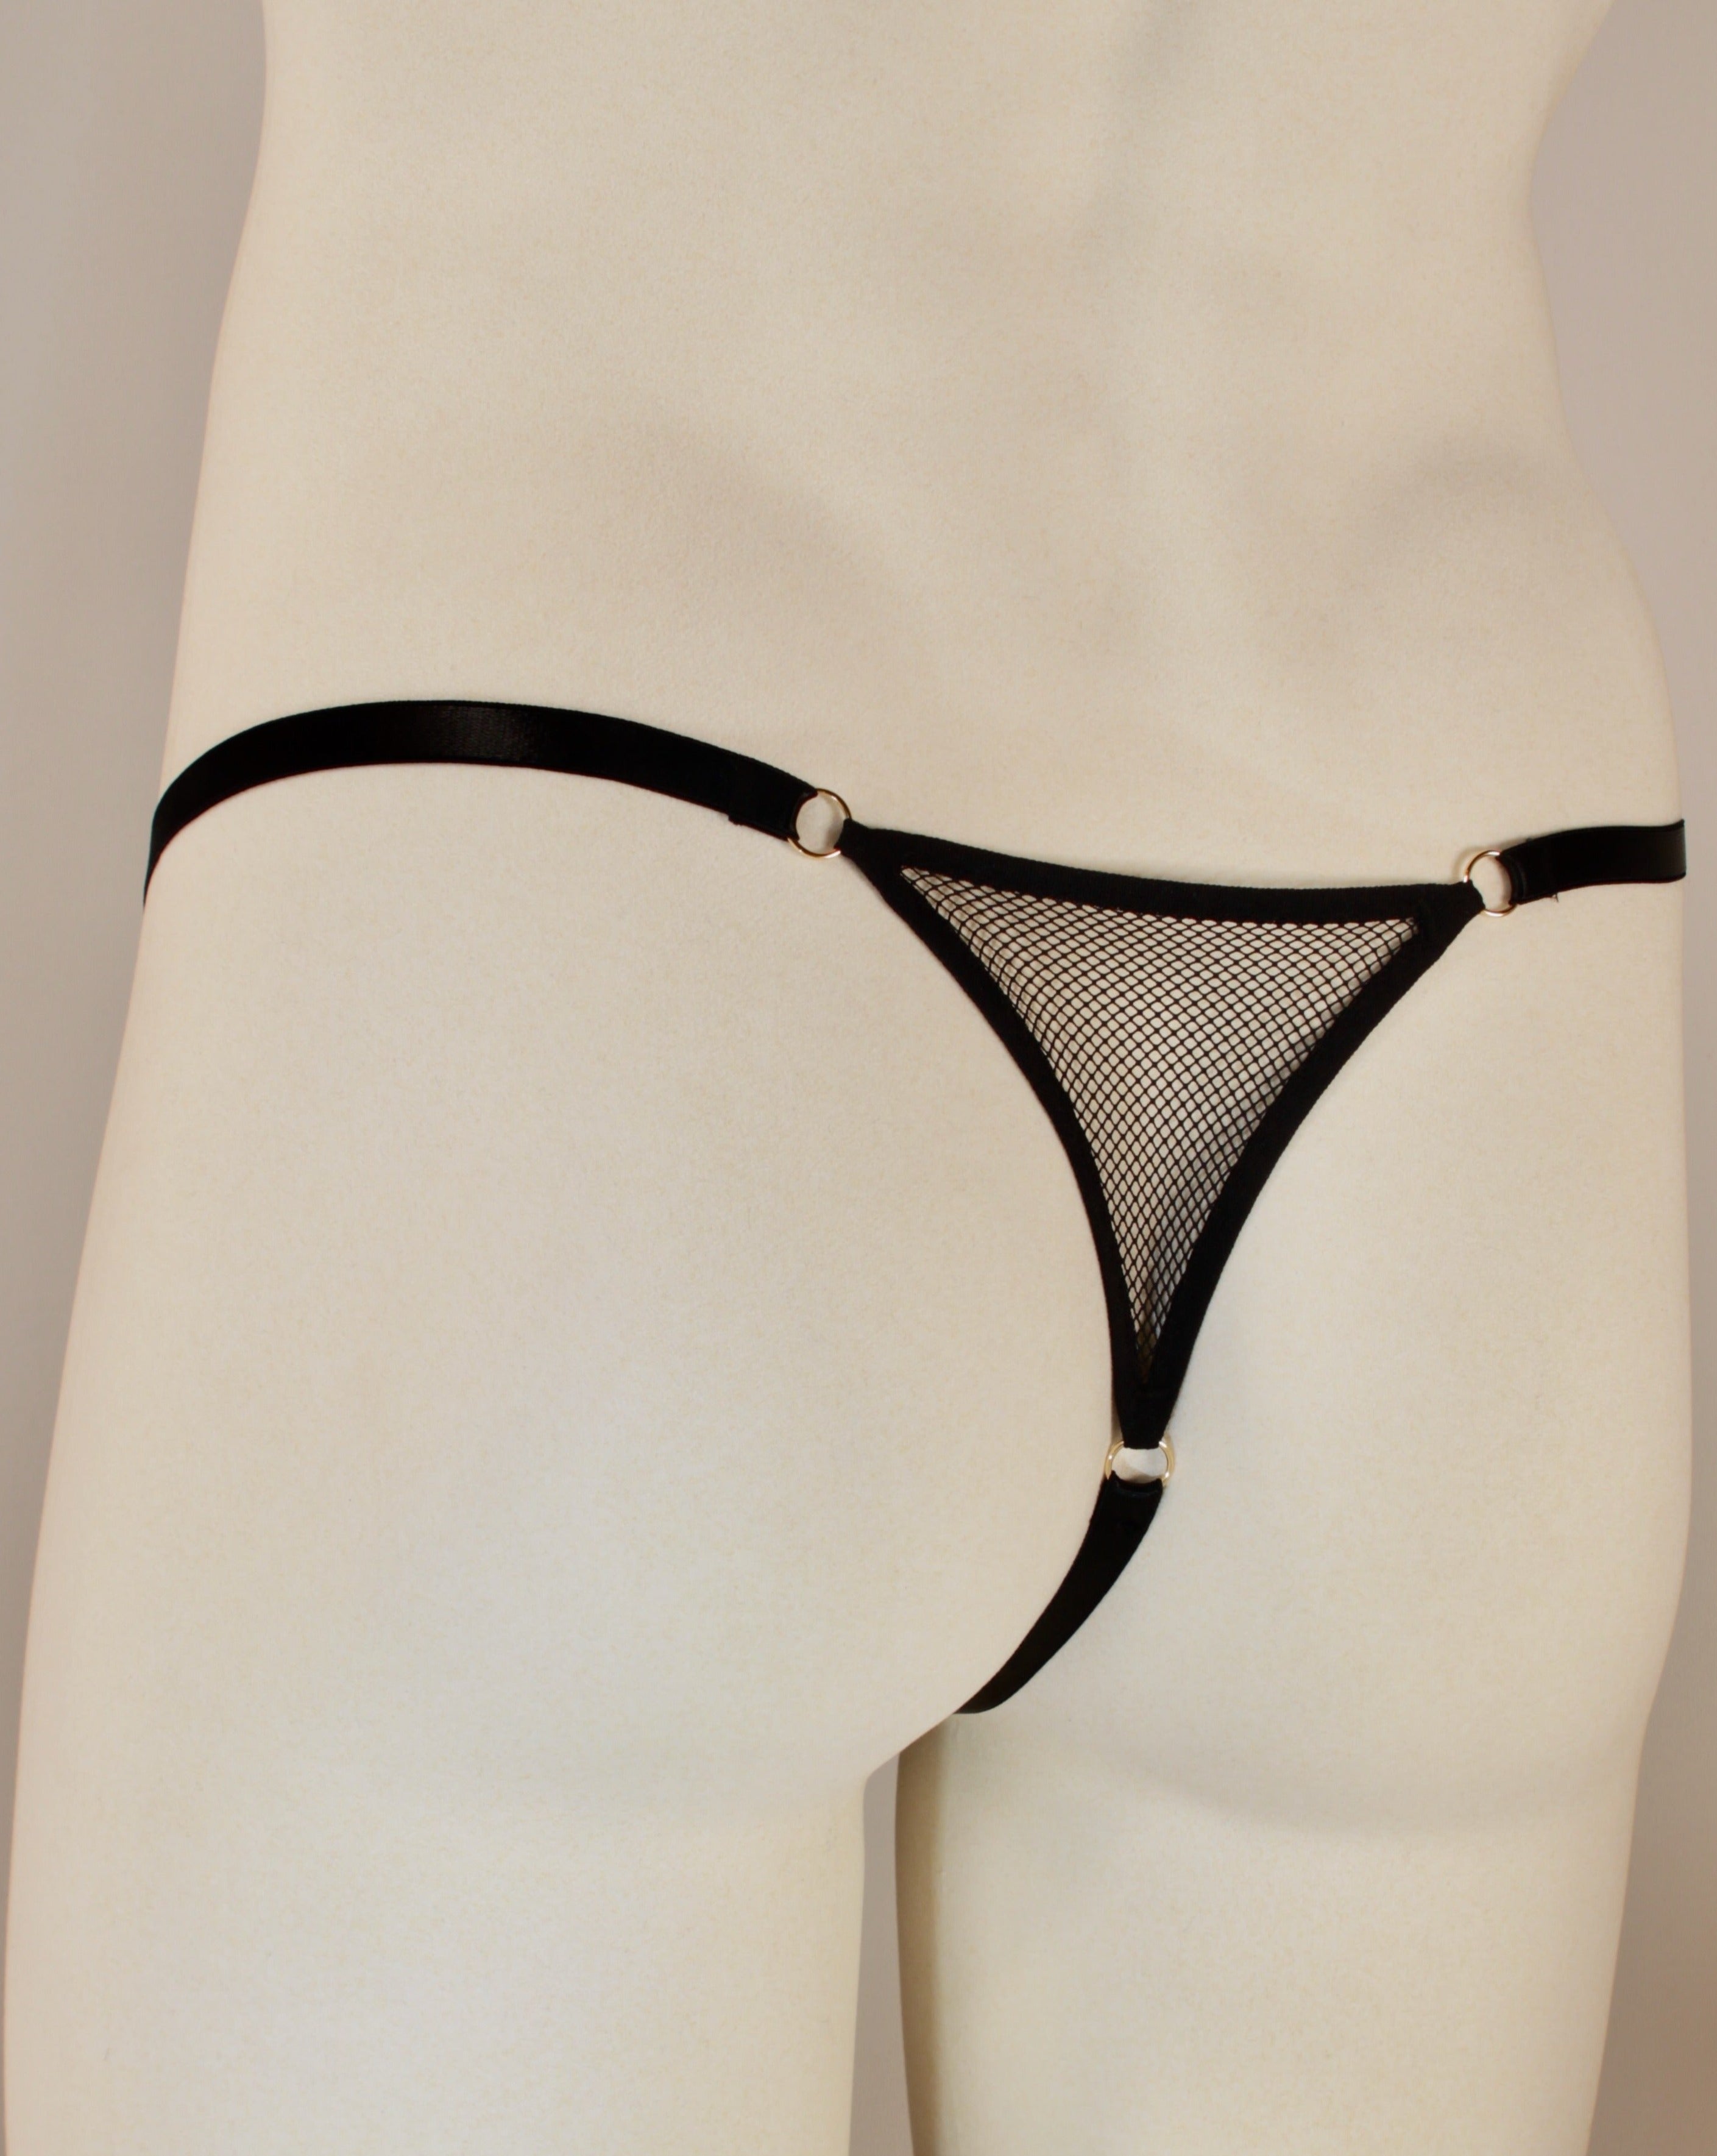 rear view of fishnet thong, sexy underwear for men, trans man friendly lingerie, pouched lingerie, sexy underwear by Moot lingerie